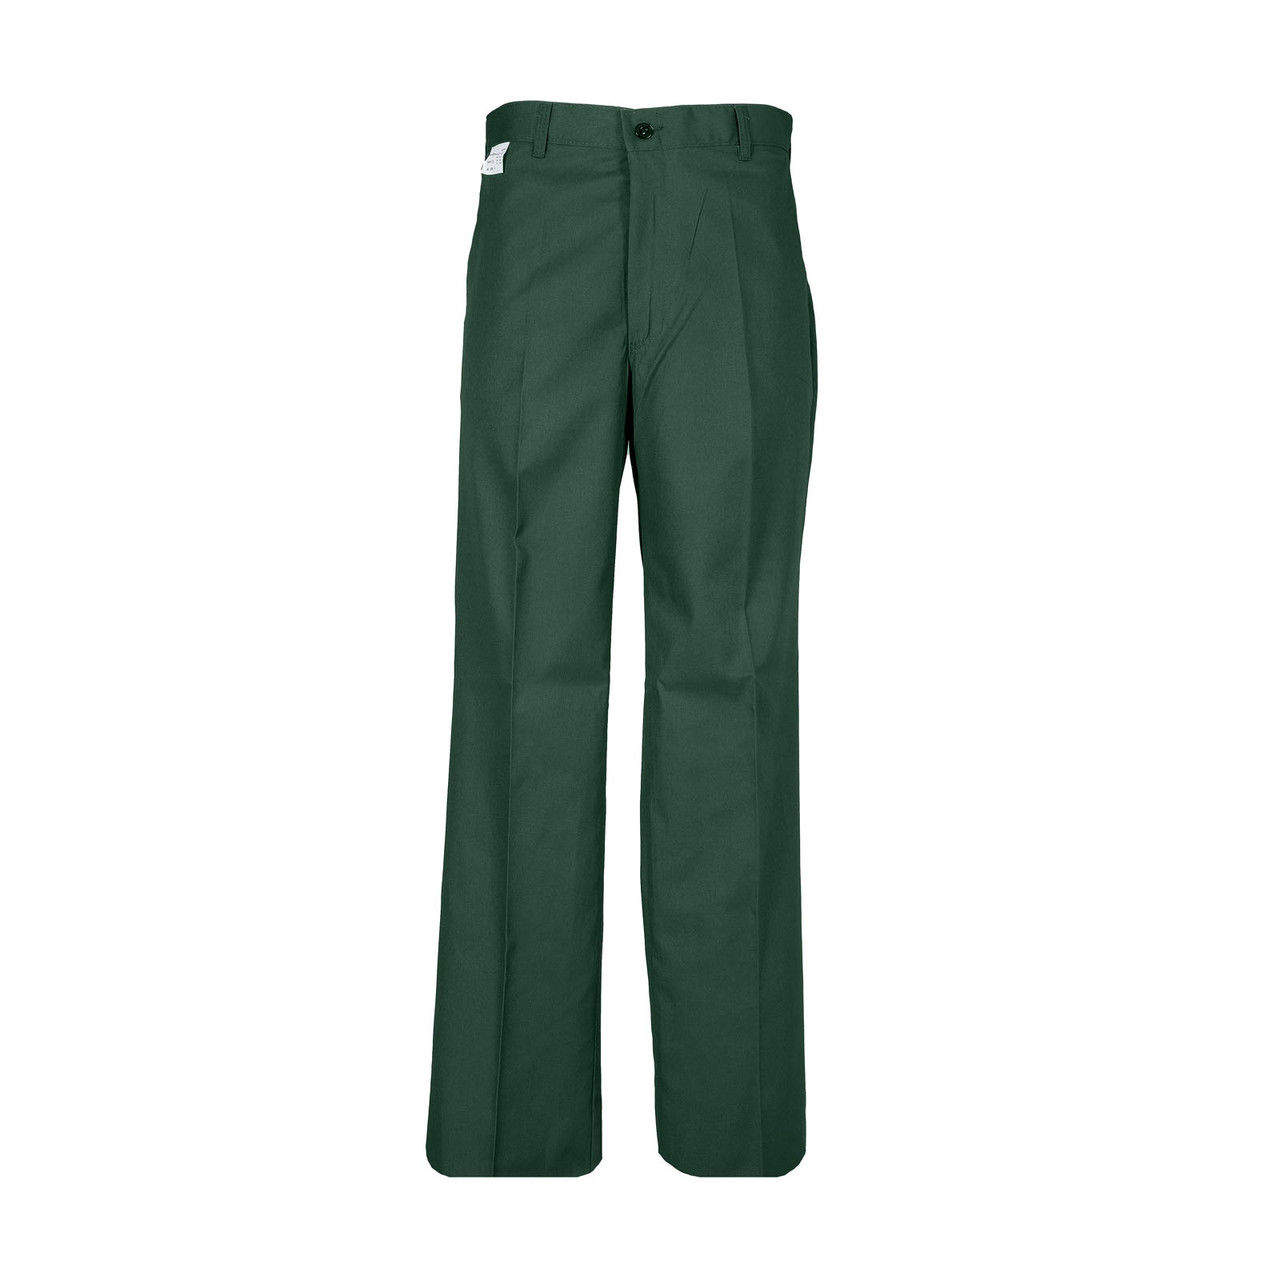 Can these green work pants endure tough industrial washings?